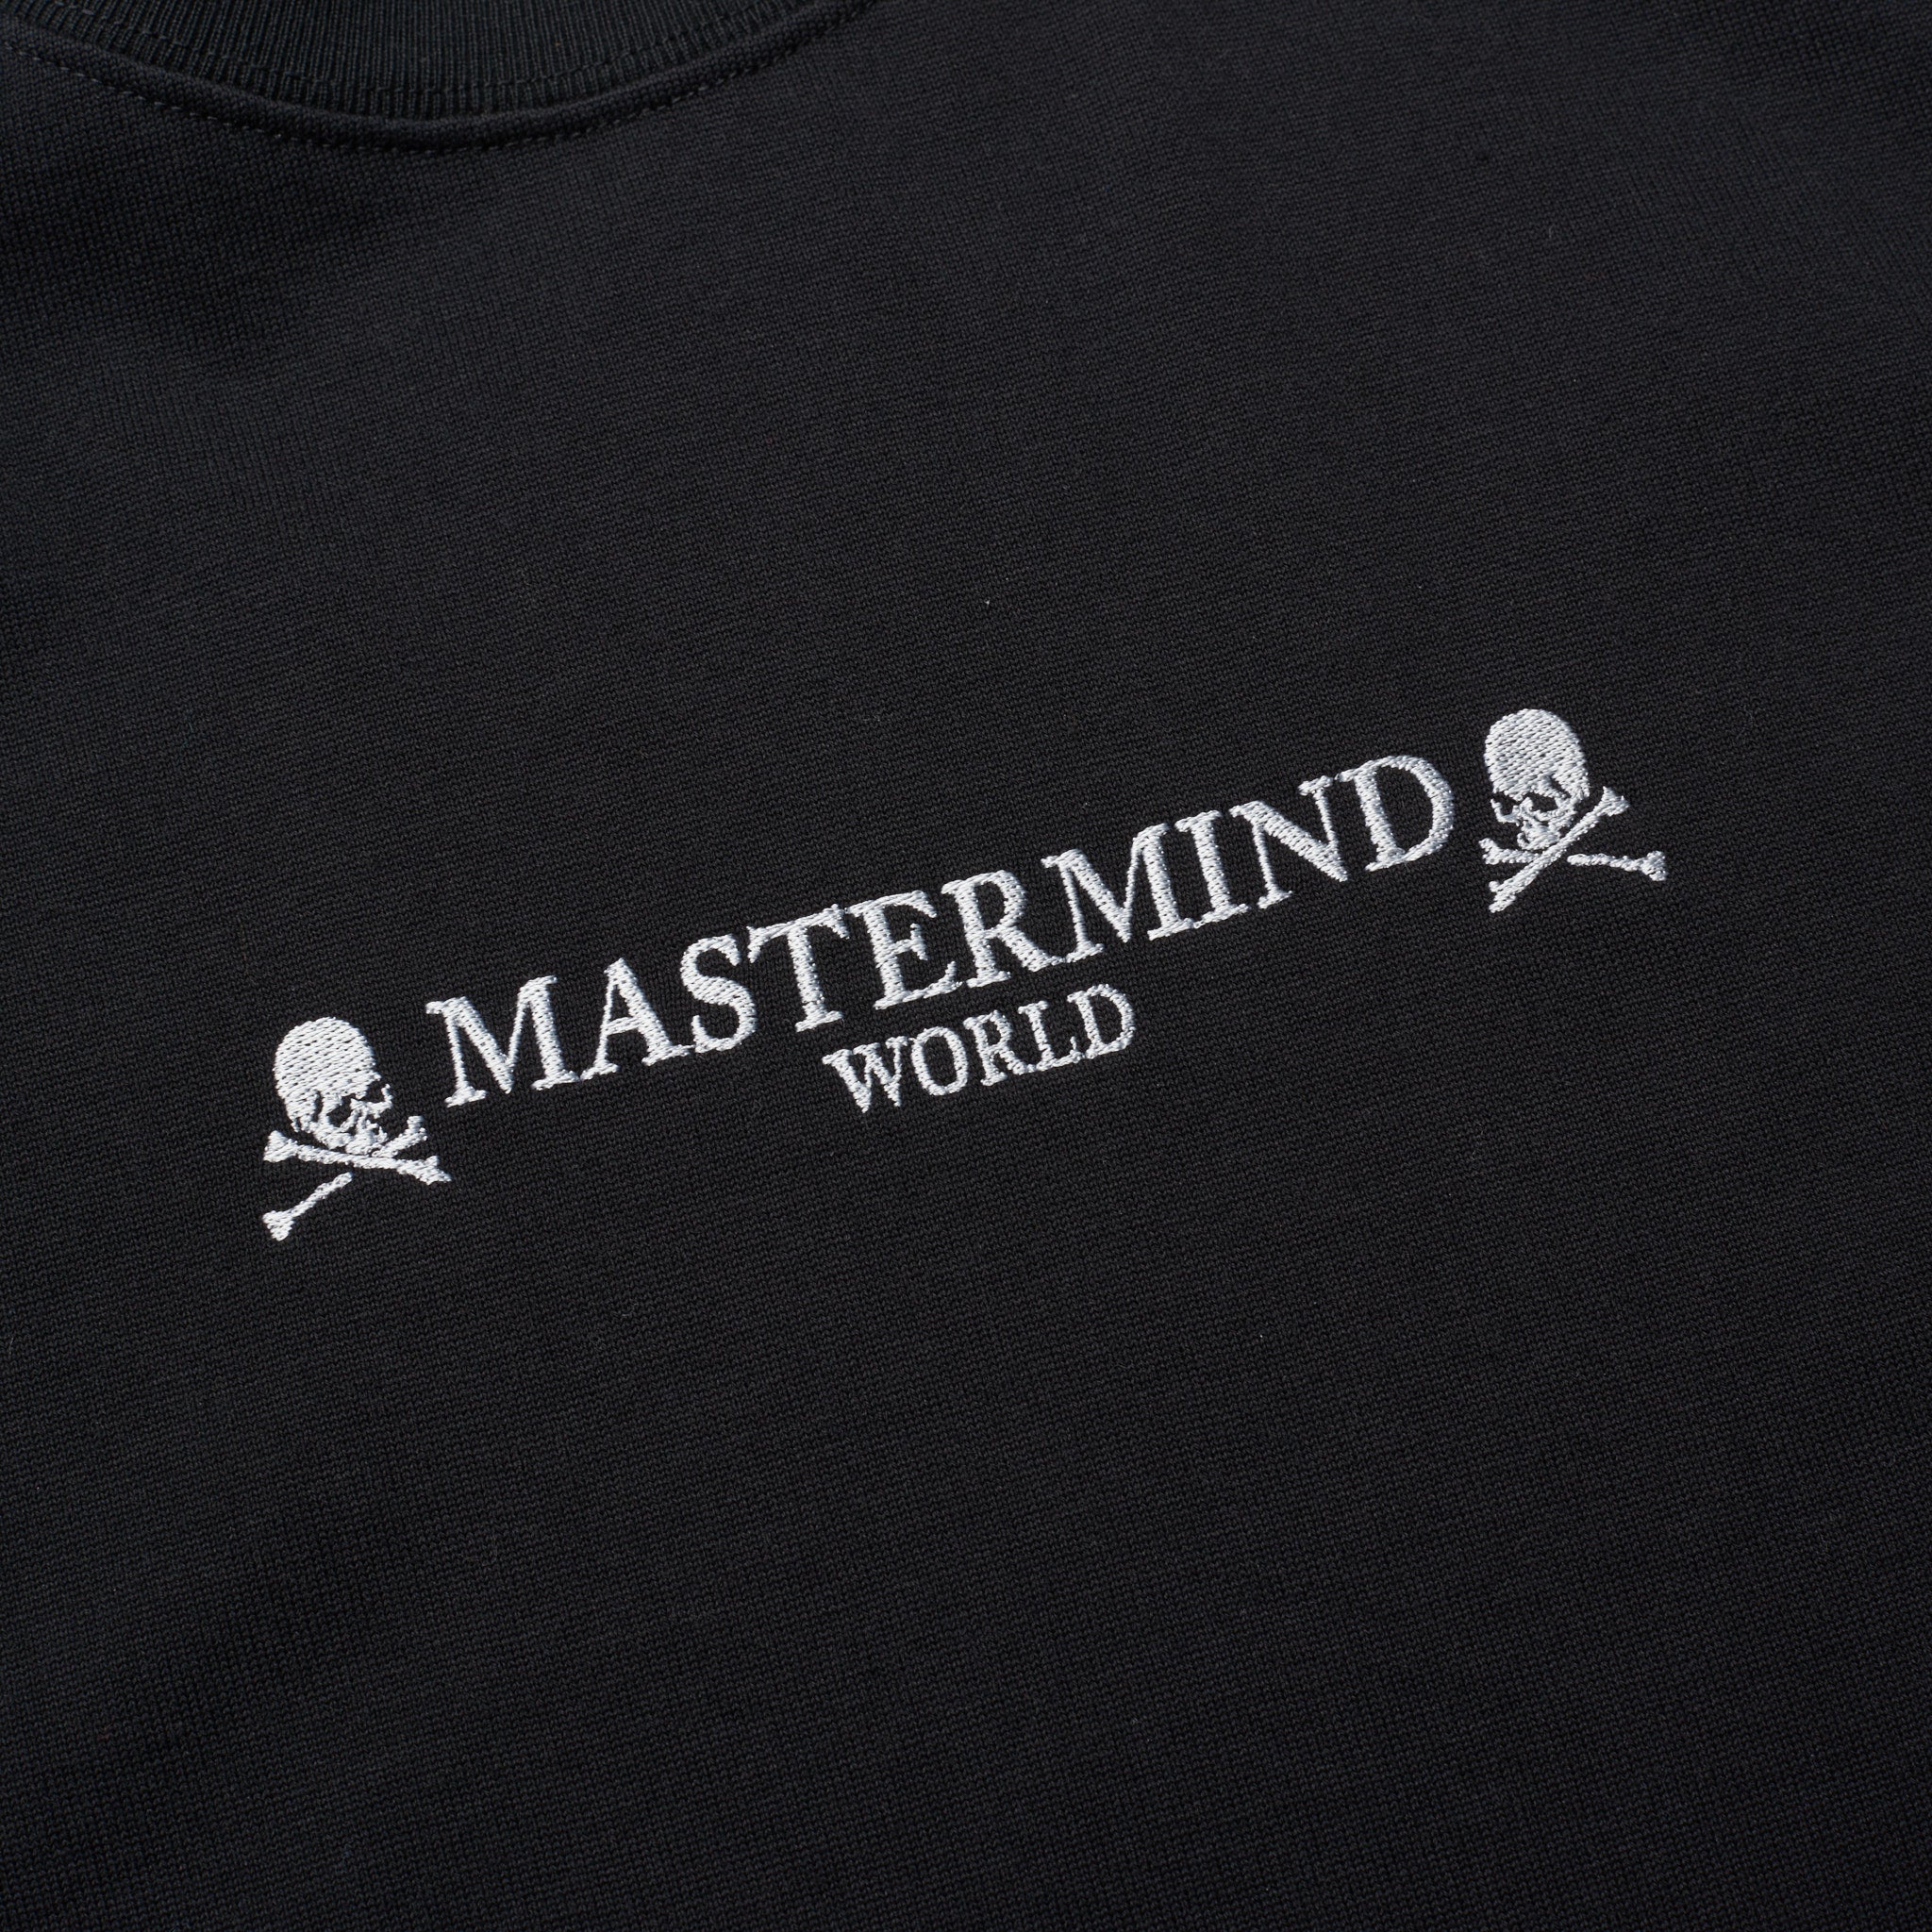 MASTERMIND WORLD Black Cotton Embroidered Chest Logo Tee T-Shirt NEW Size L